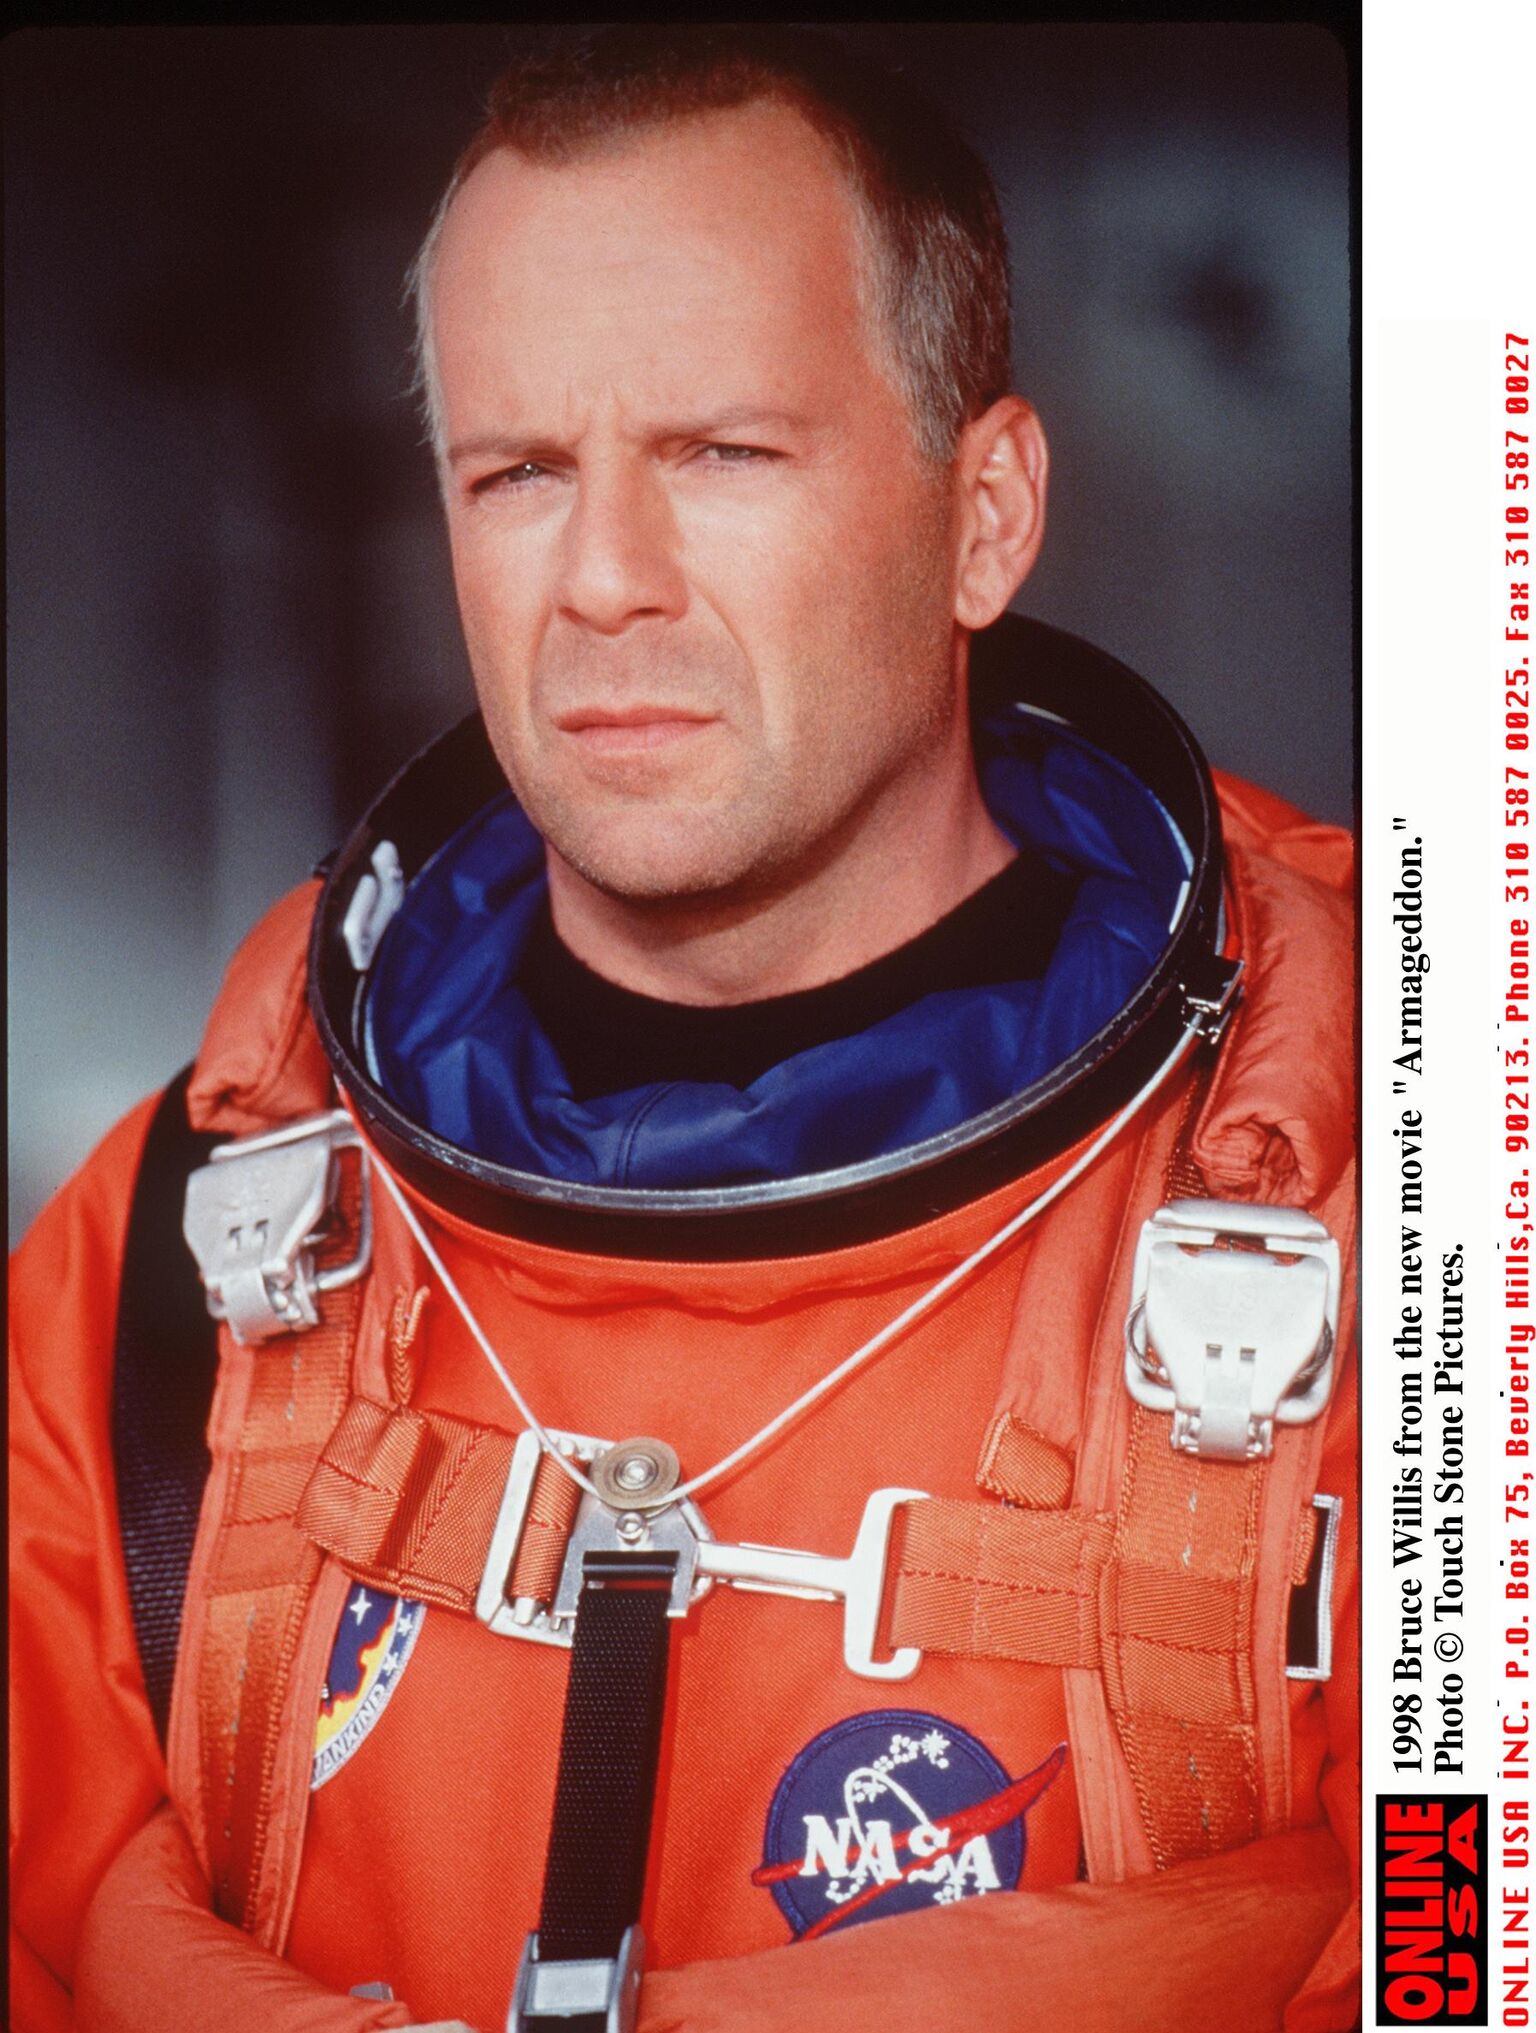 1998 Bruce Willis In "Armageddon." | Getty Images